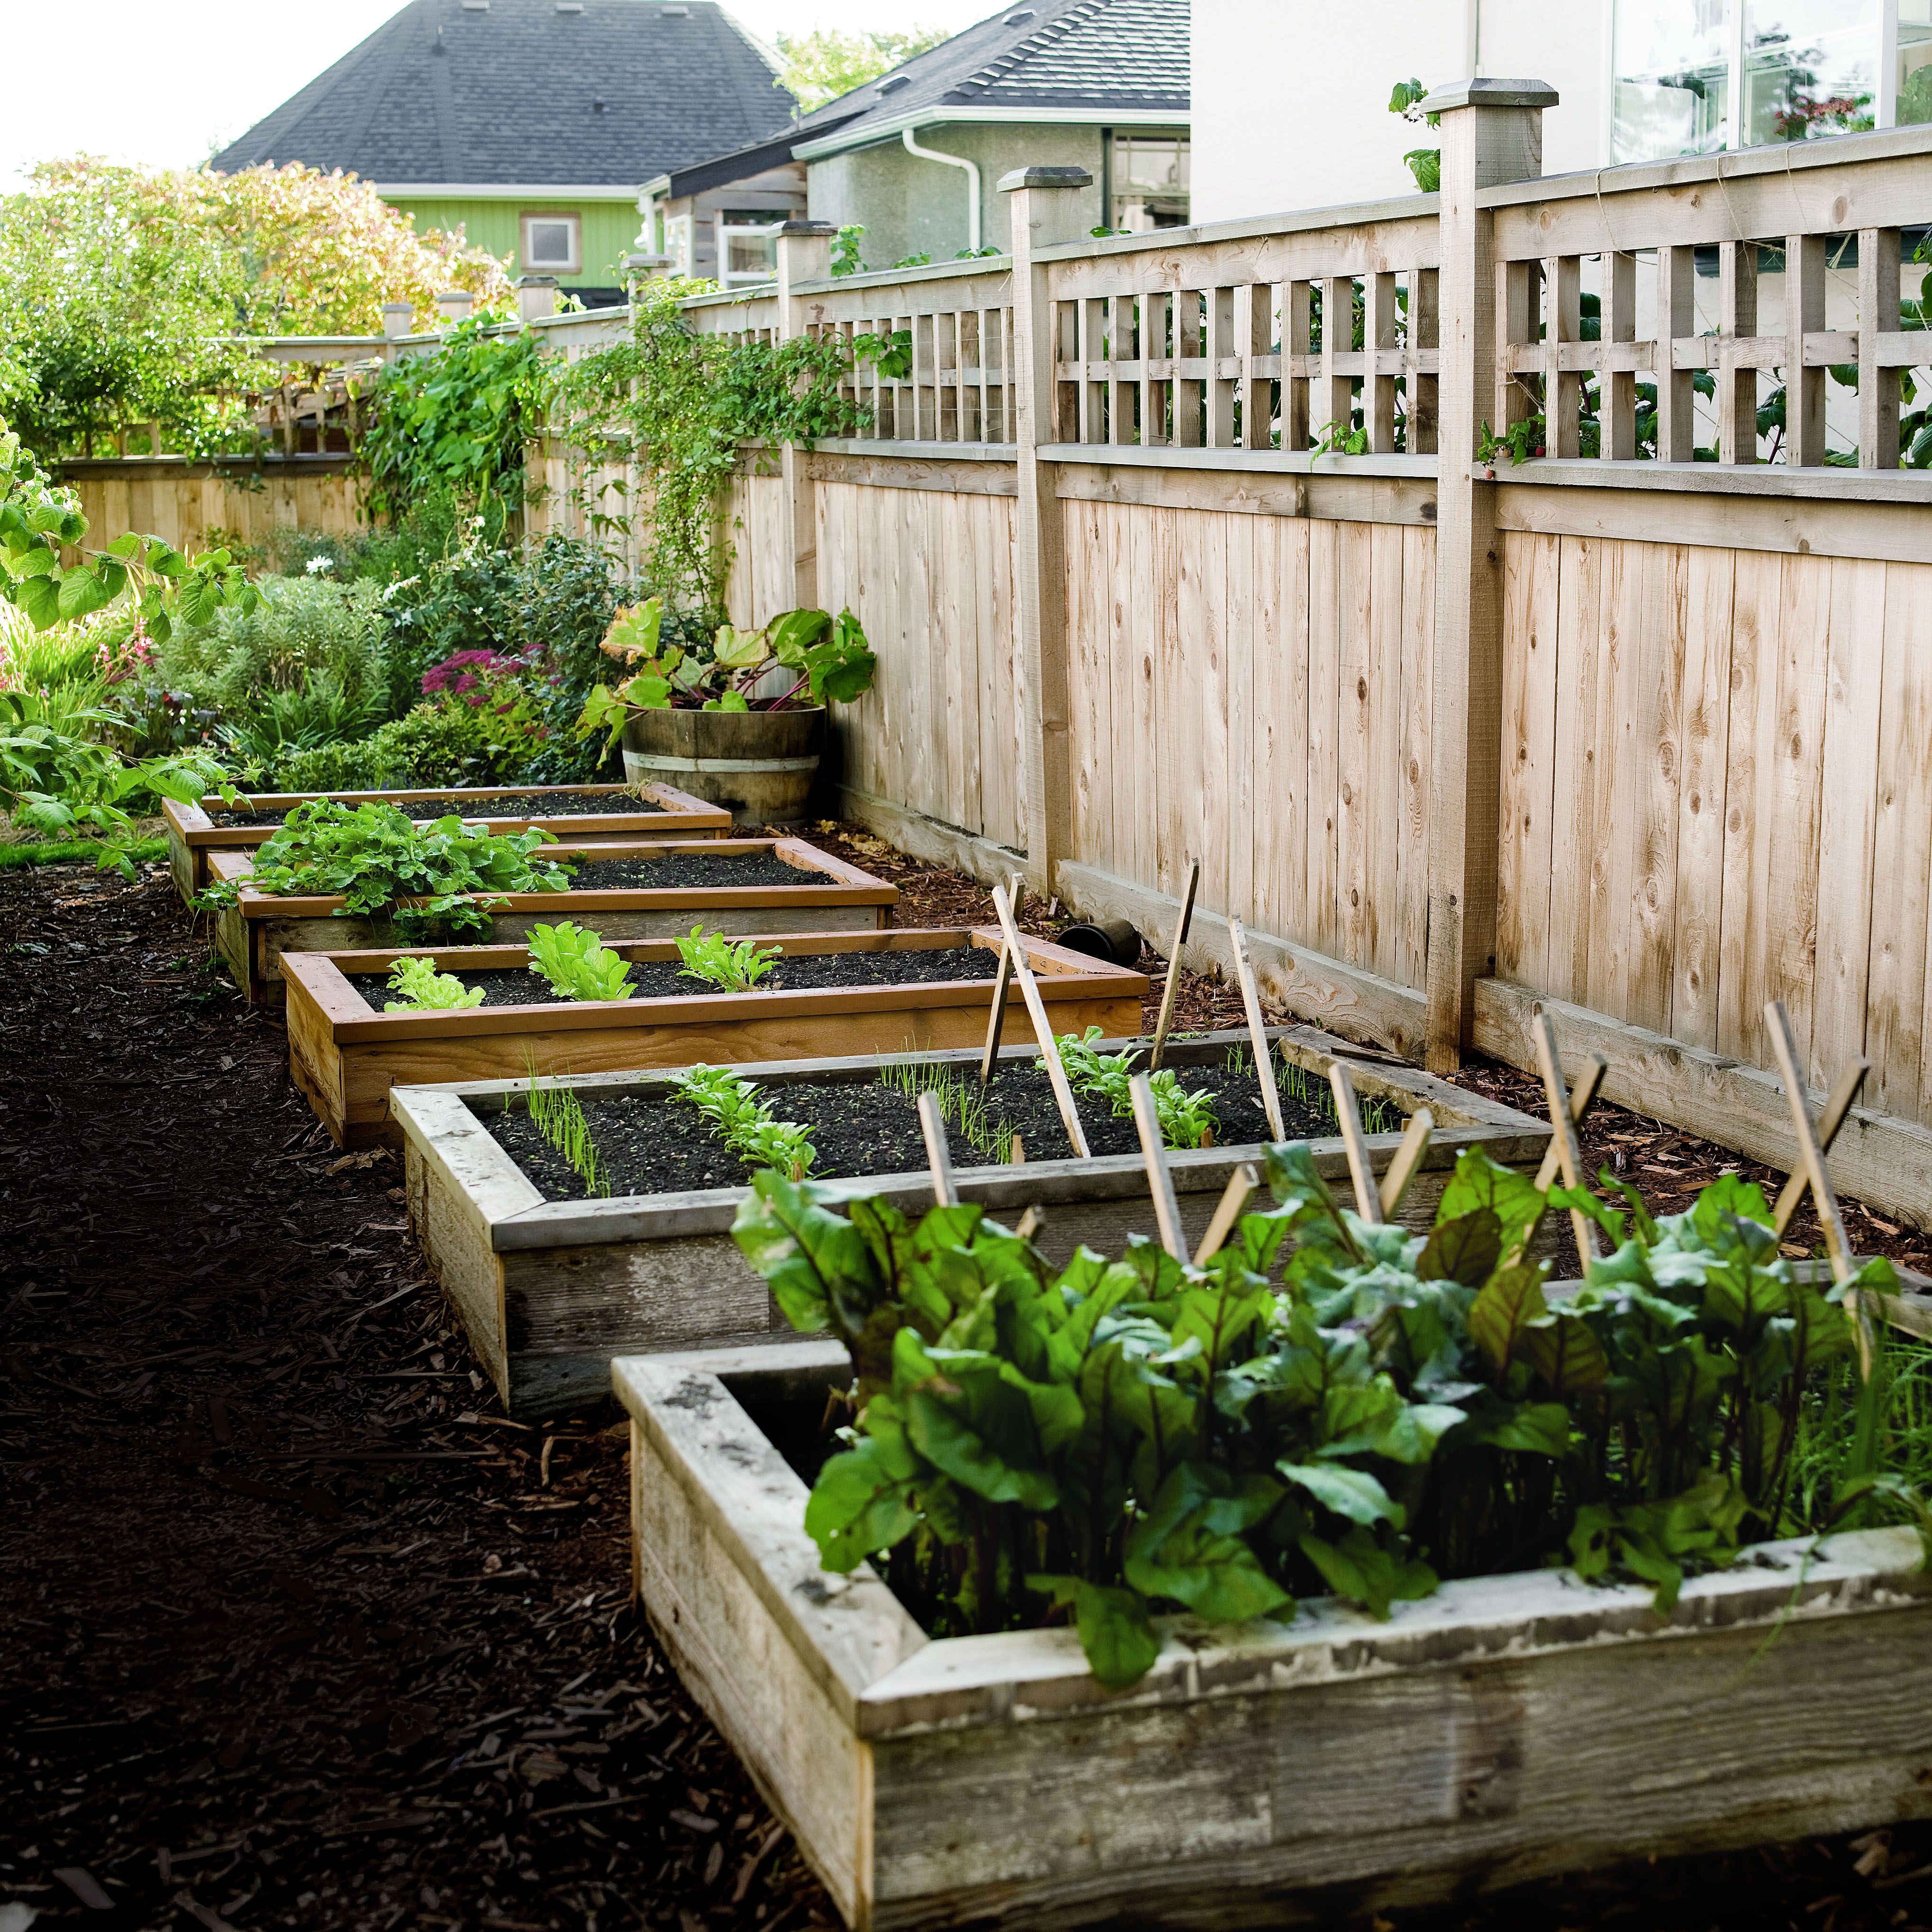 How to Build a Beautiful Raised Garden Bed in 5 Easy Steps